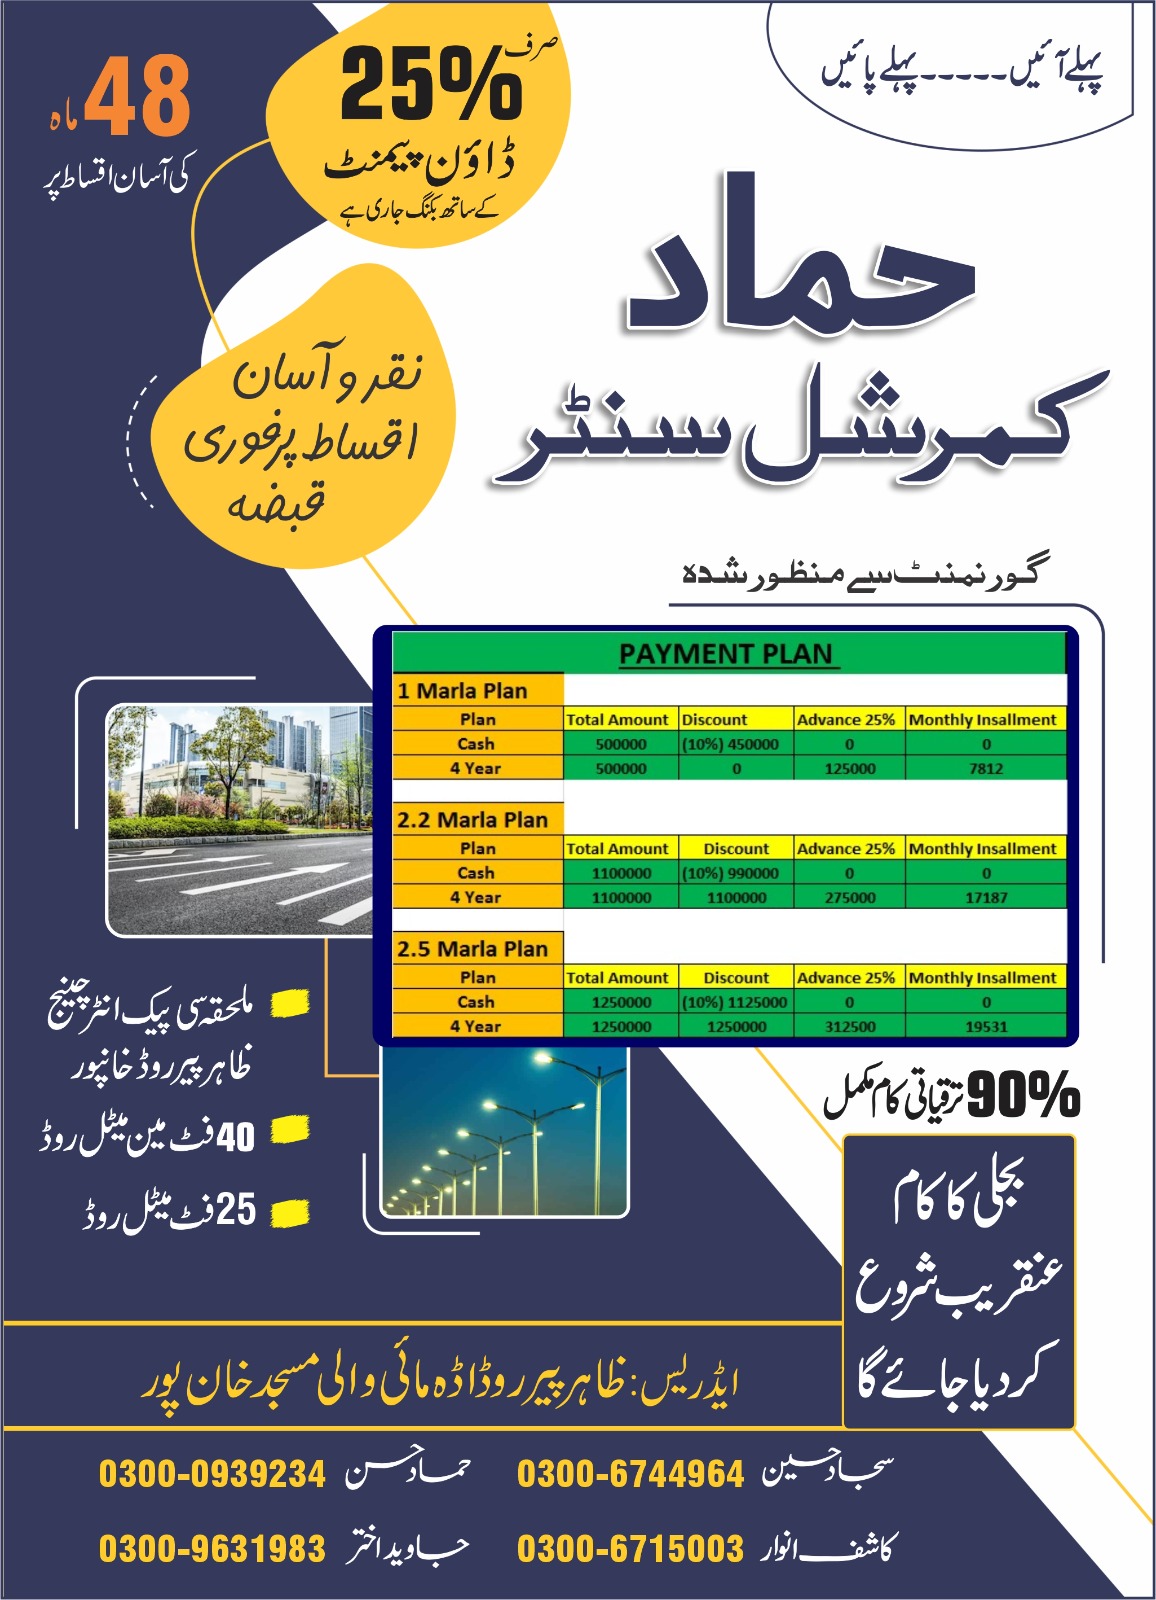 Hammad Commercial Center Payment Plan